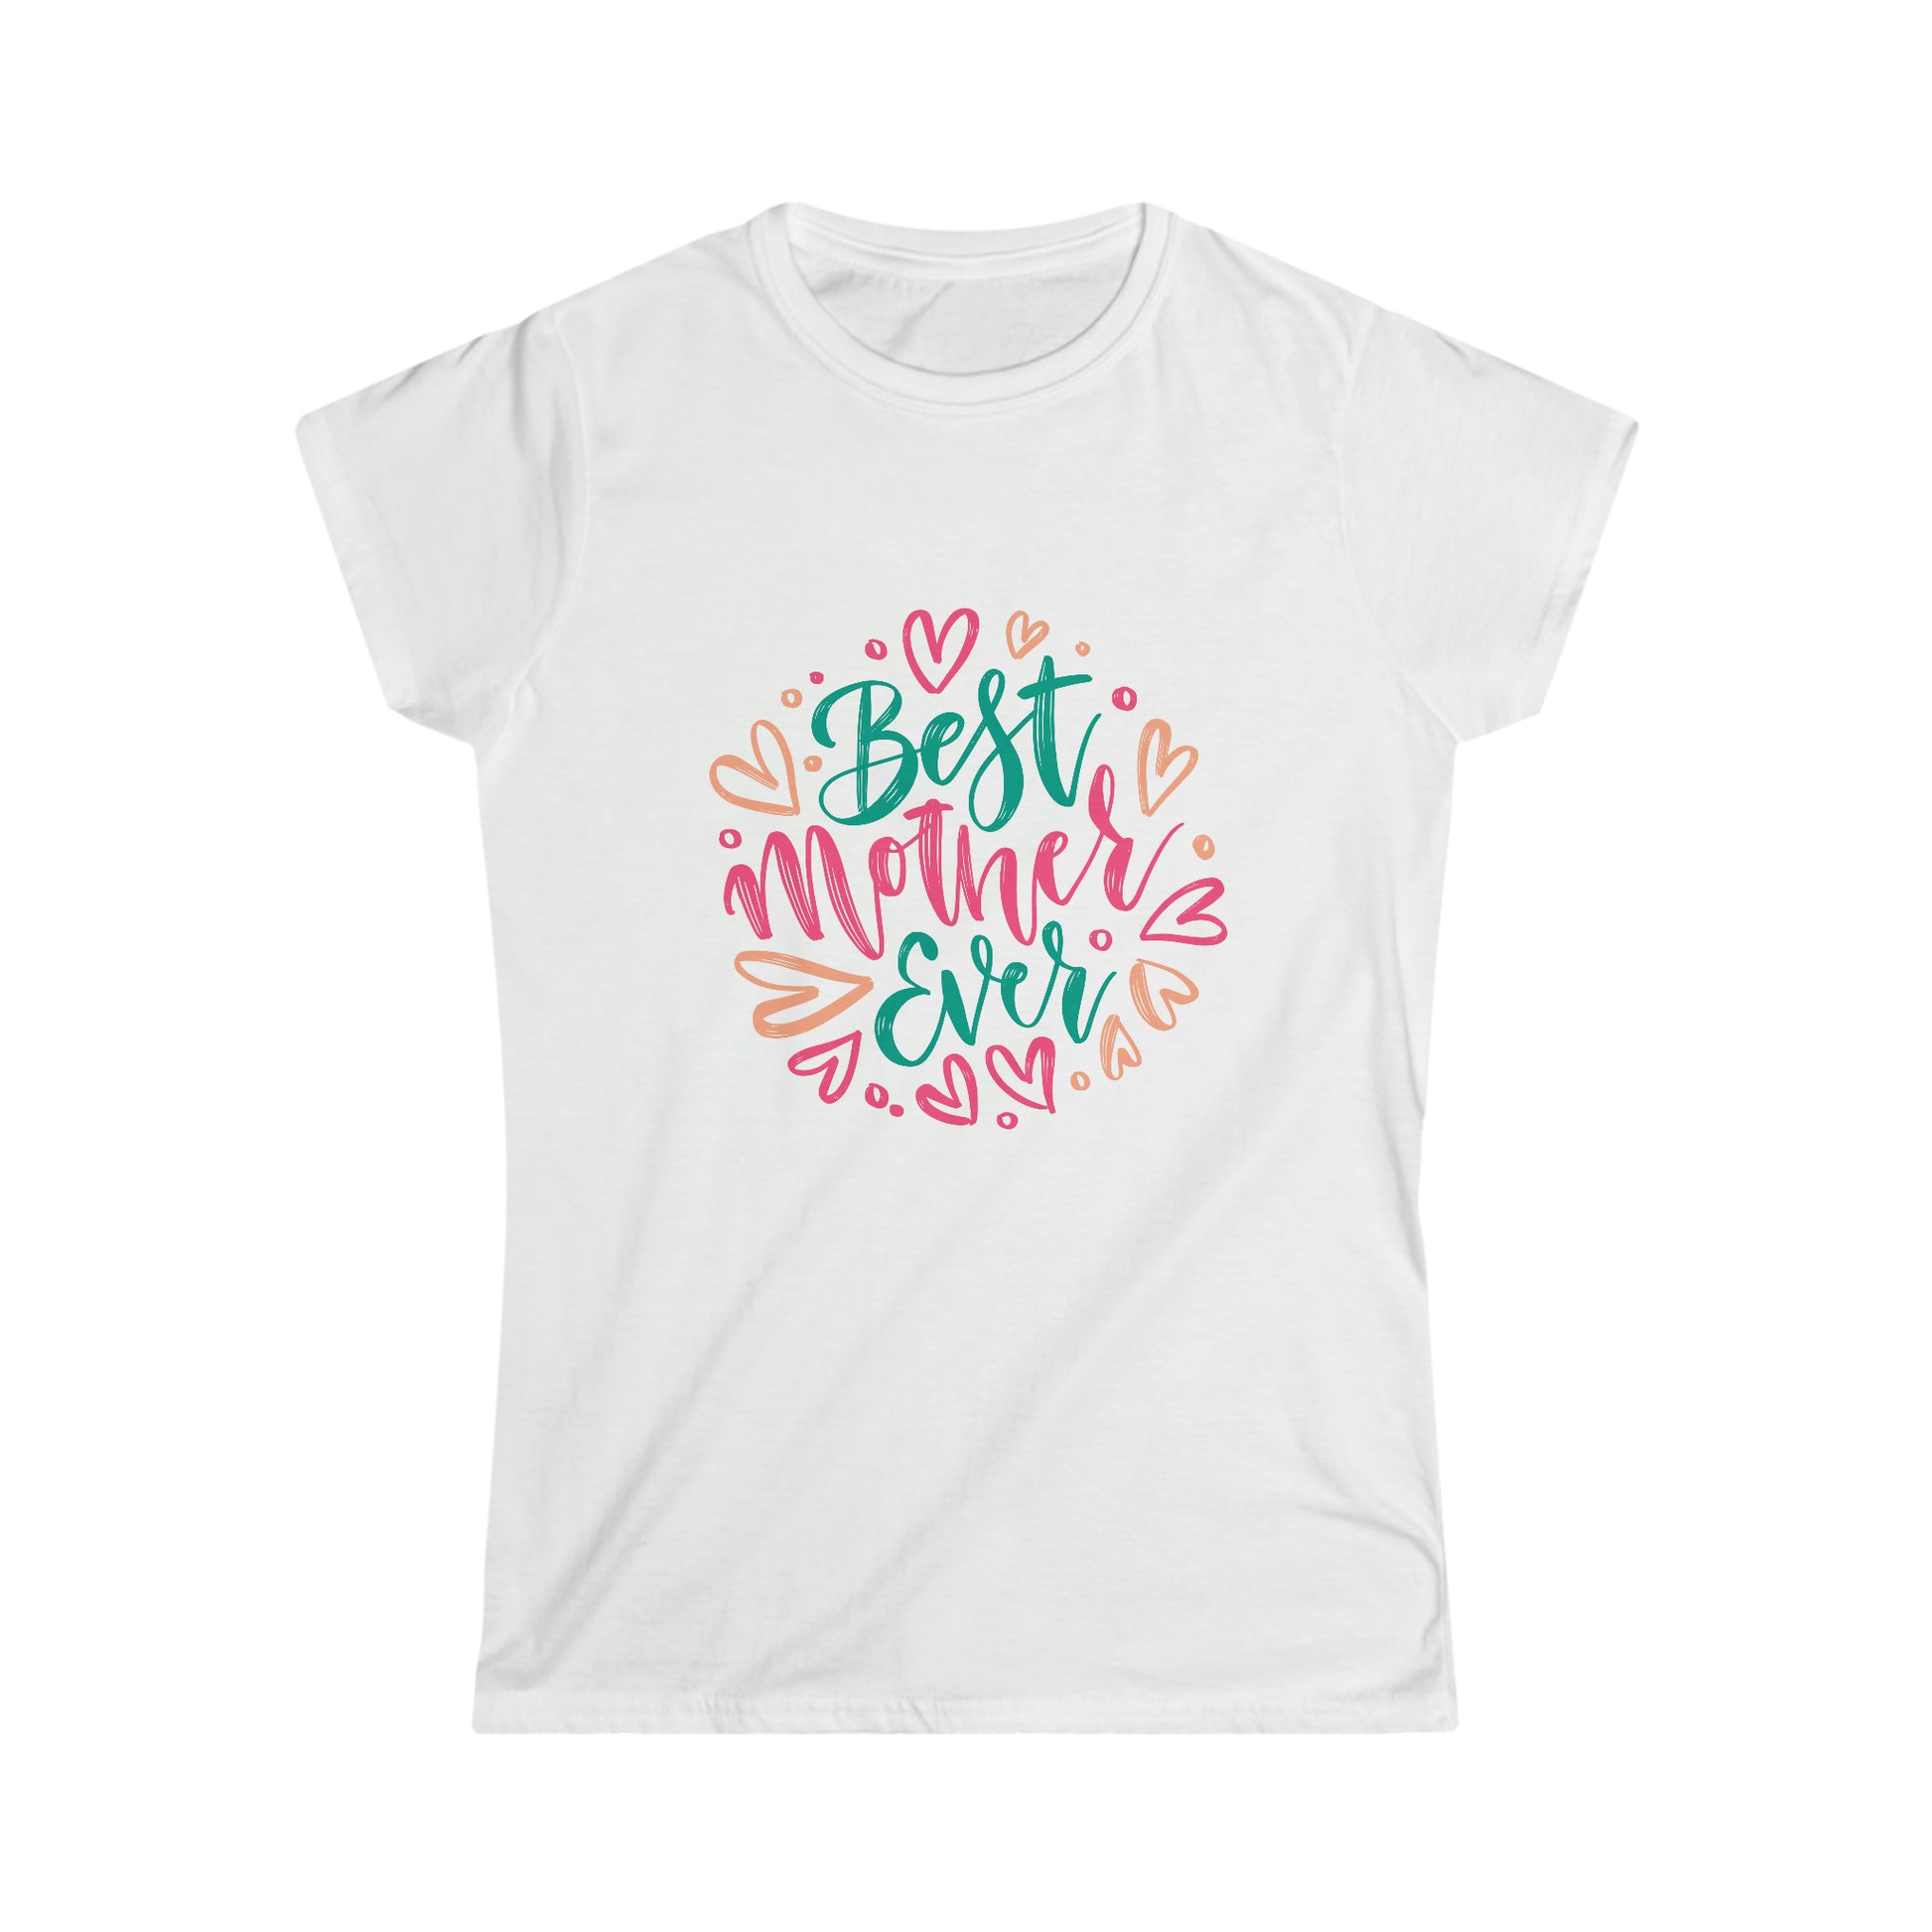 Whether you're celebrating Mother's Day or just want to let her know how much she means to you, our Best Mother Ever white t-shirt is sure to bring a smile to her face.